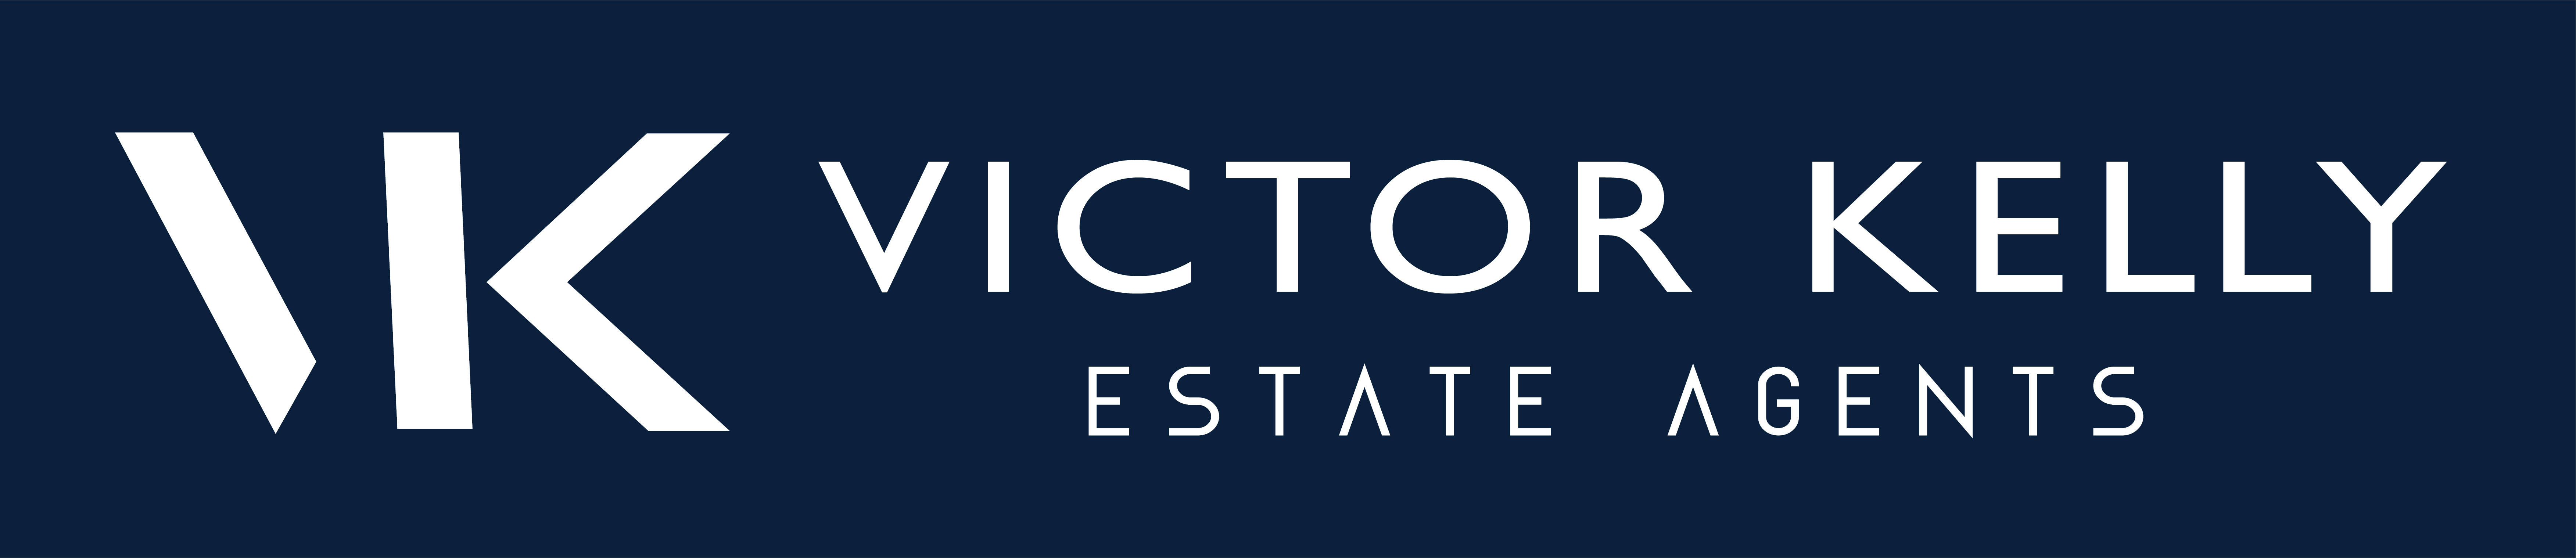 Victor Kelly Estate Agents - 